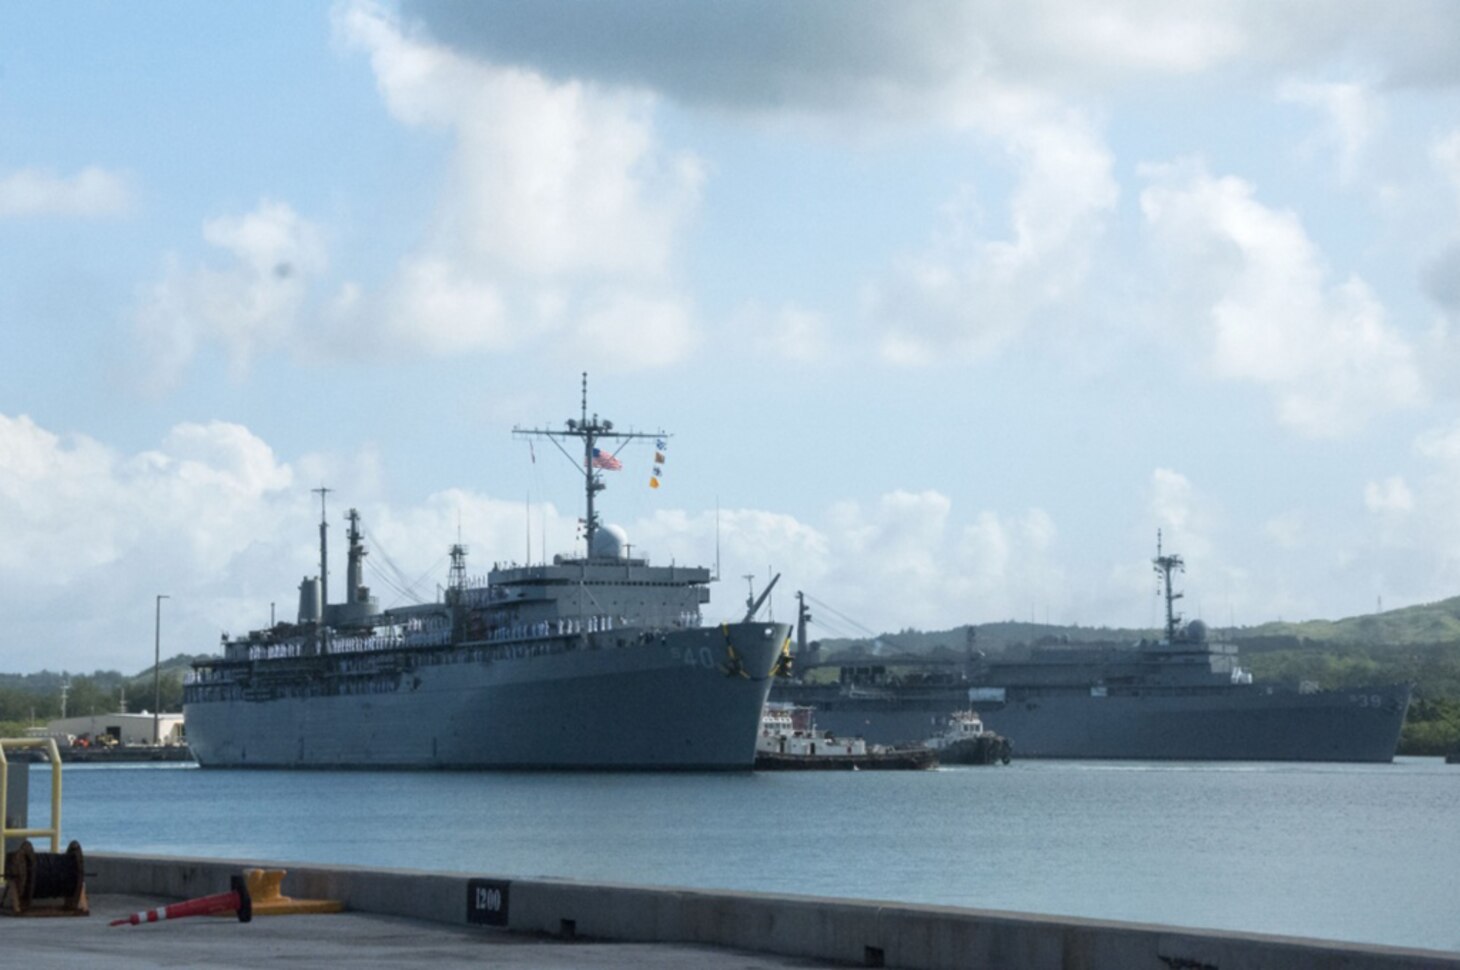 Submarine tender USS Frank Cable (AS 40) passes the U.S. Navy's only other submarine tender, USS Emory S. Land (AS 39), in Apra Harbor following Frank Cable's return to home port this morning after completing a five-month deployment, Nov, 8, 2016. Frank Cable departed Guam June 6 and was a persistent presence throughout the Indo-Asia-Pacific region during its deployment, providing vital flexibility to the fleet commanders and extending the range and impact of U.S. naval forces in the U.S. Navy's 5th and 7th Fleets. Forward deployed to Guam, Frank Cable's combined Navy and Military Sealift Command's crew's mission is to provide critical warfighting repairs, rearmament and reprovisioning to deployed naval forces of the United States. 